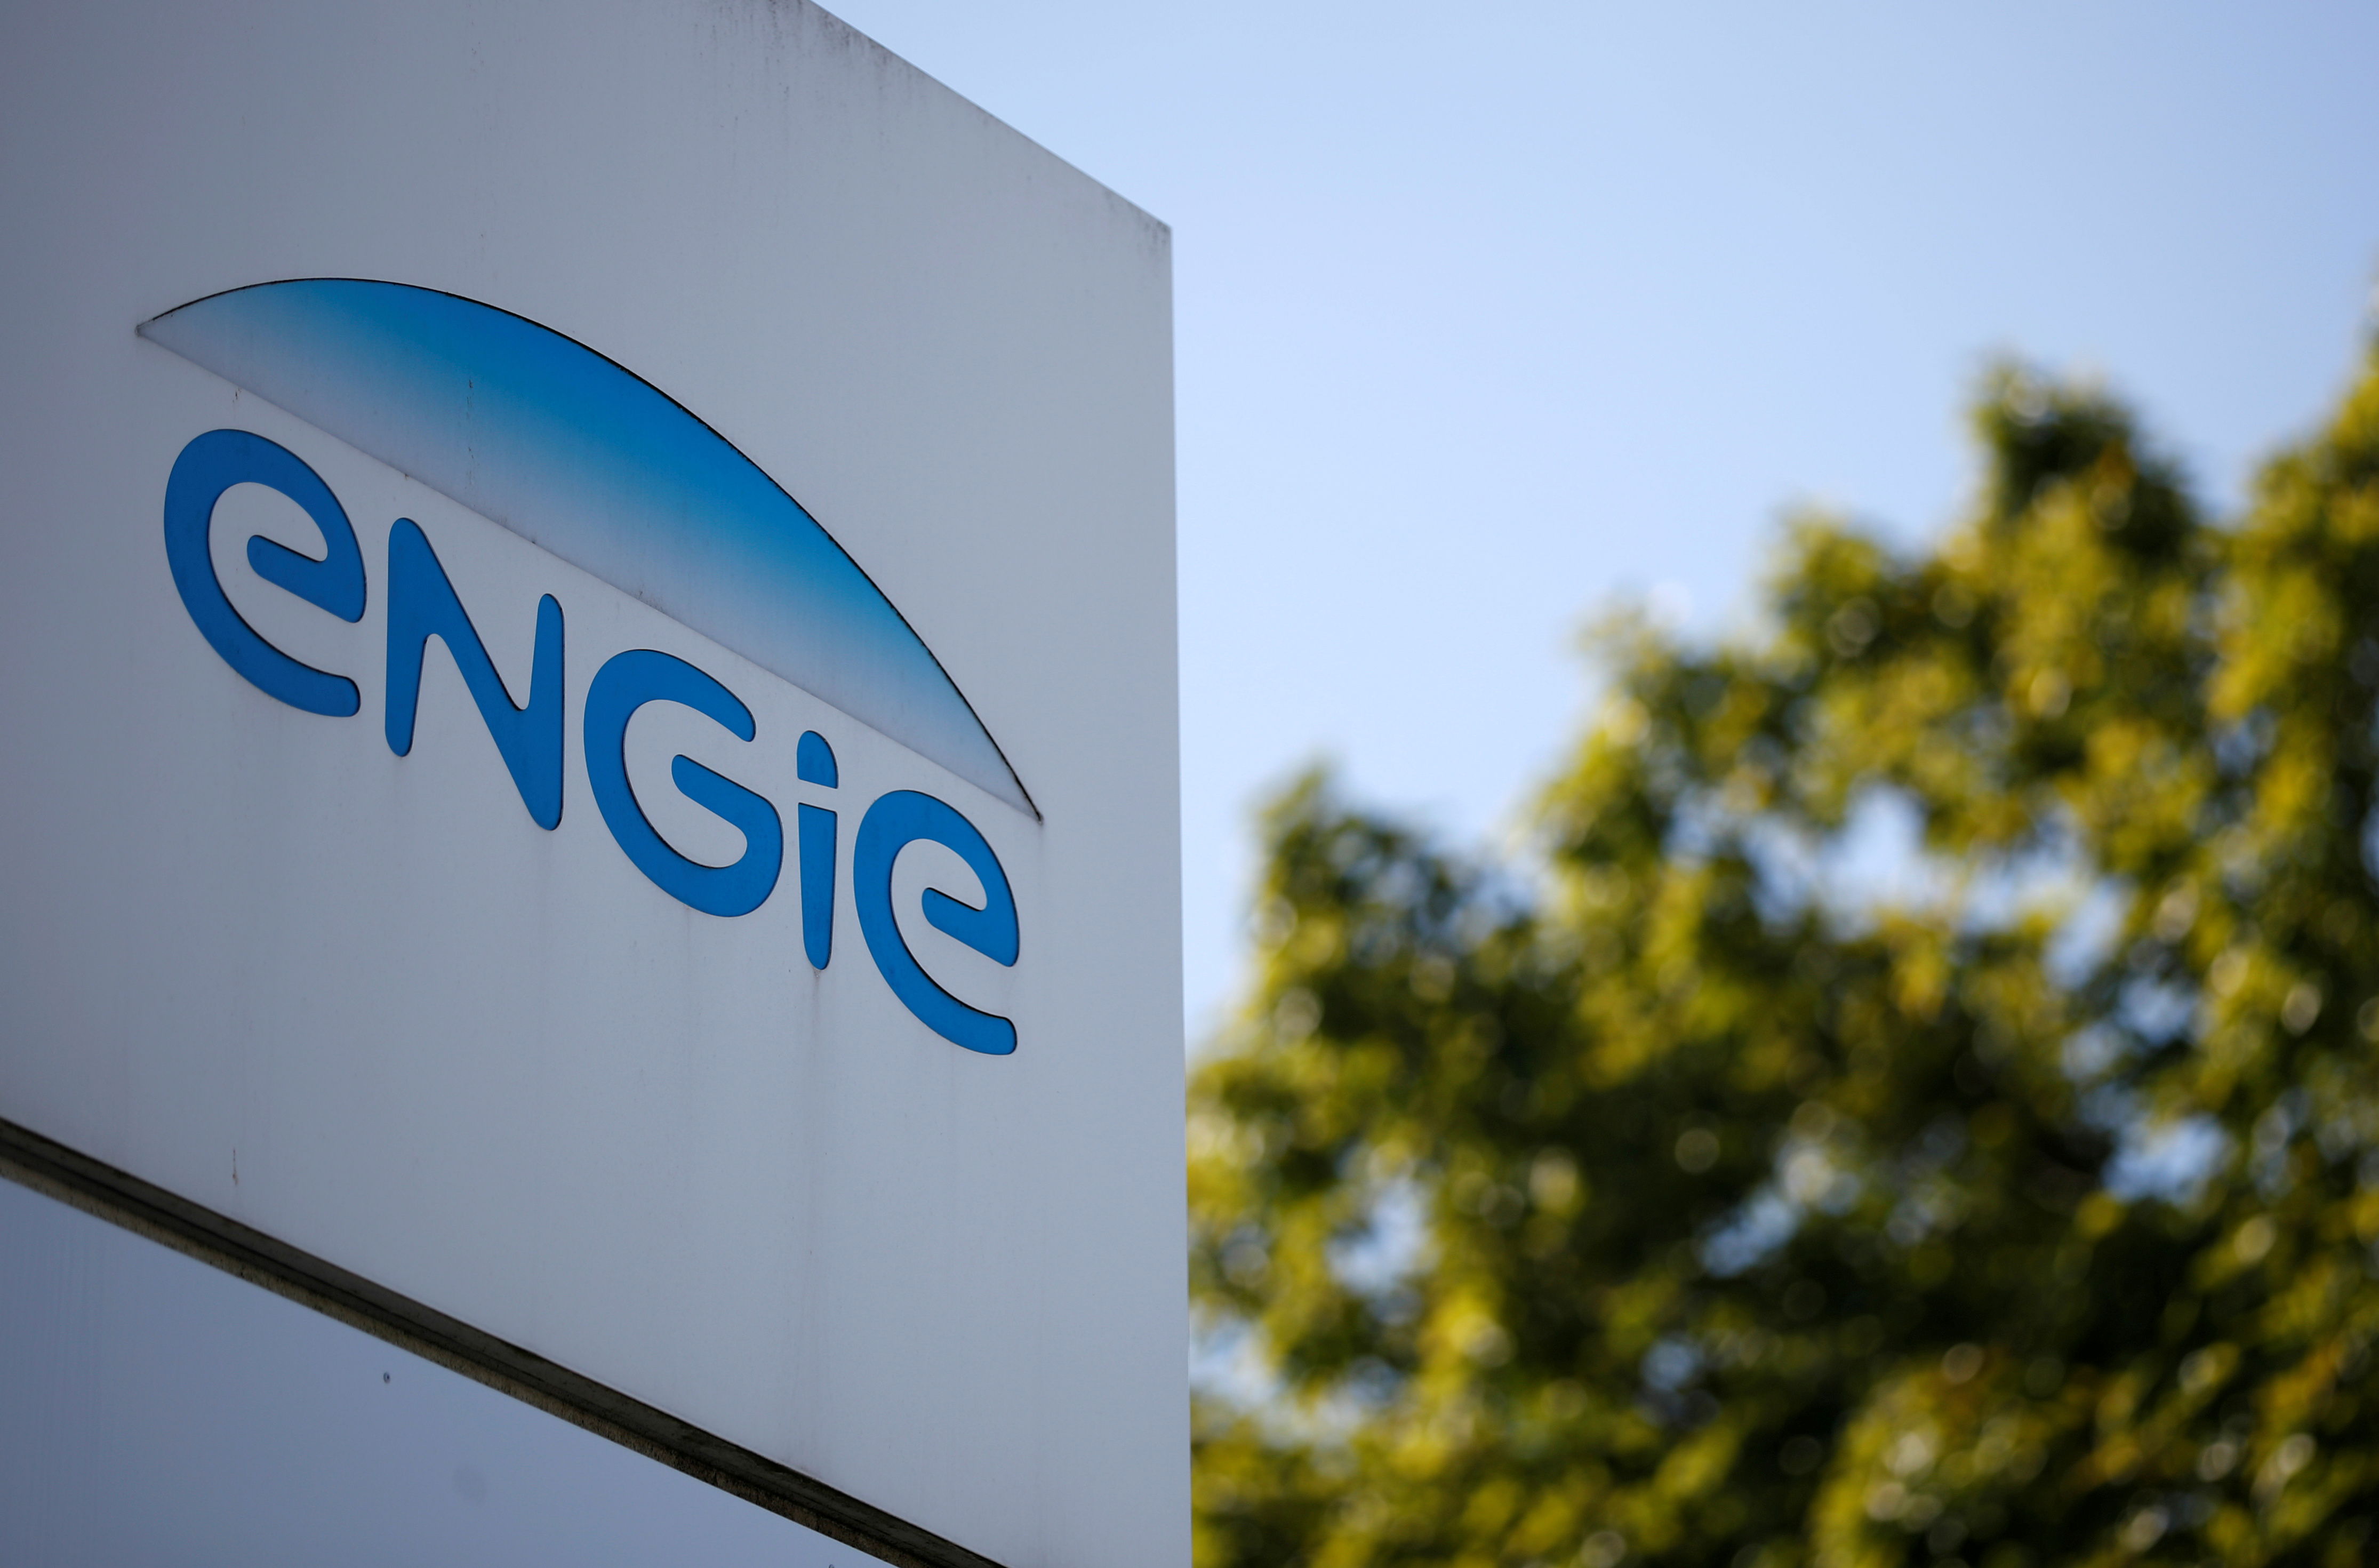 Google and ENGIE's New Renewable Energy Deals: Leading the Charge Towards Sustainability